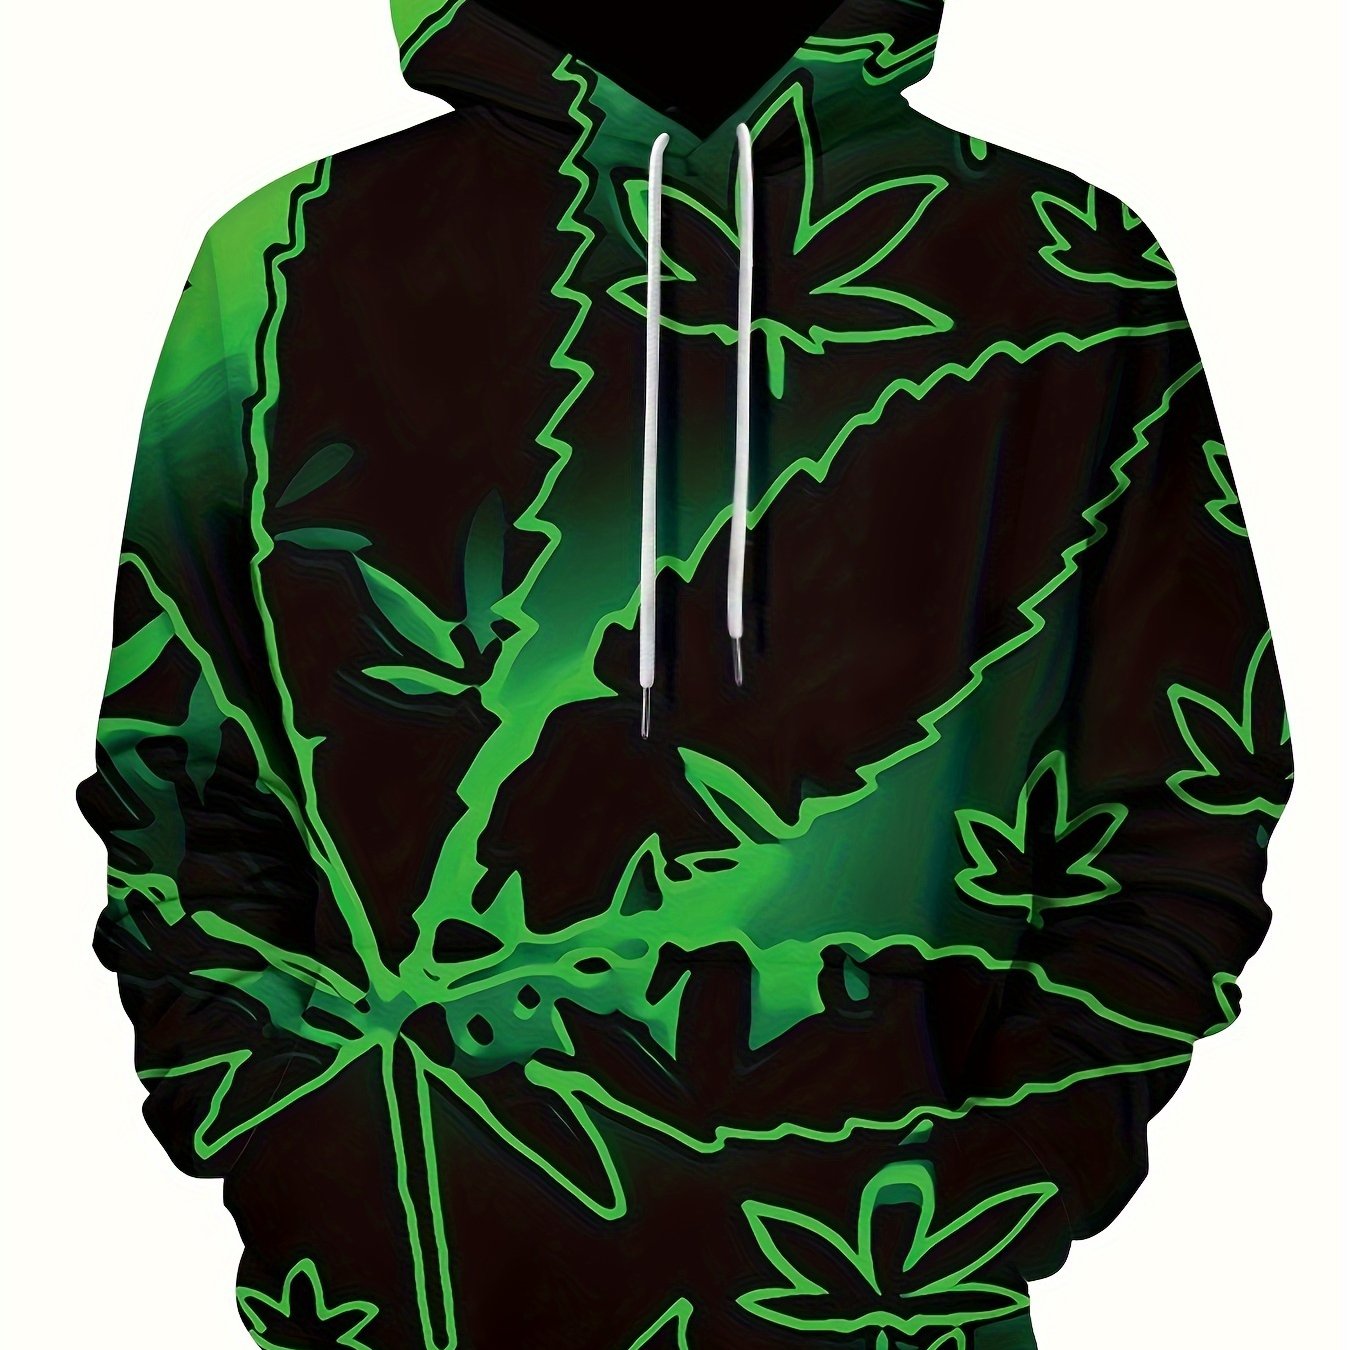 Leaf Pattern Print Hoodie, Cool Hoodies For Men, Men's Casual Graphic Design Pullover Hooded Sweatshirt Streetwear For Winter Fall, As Gifts